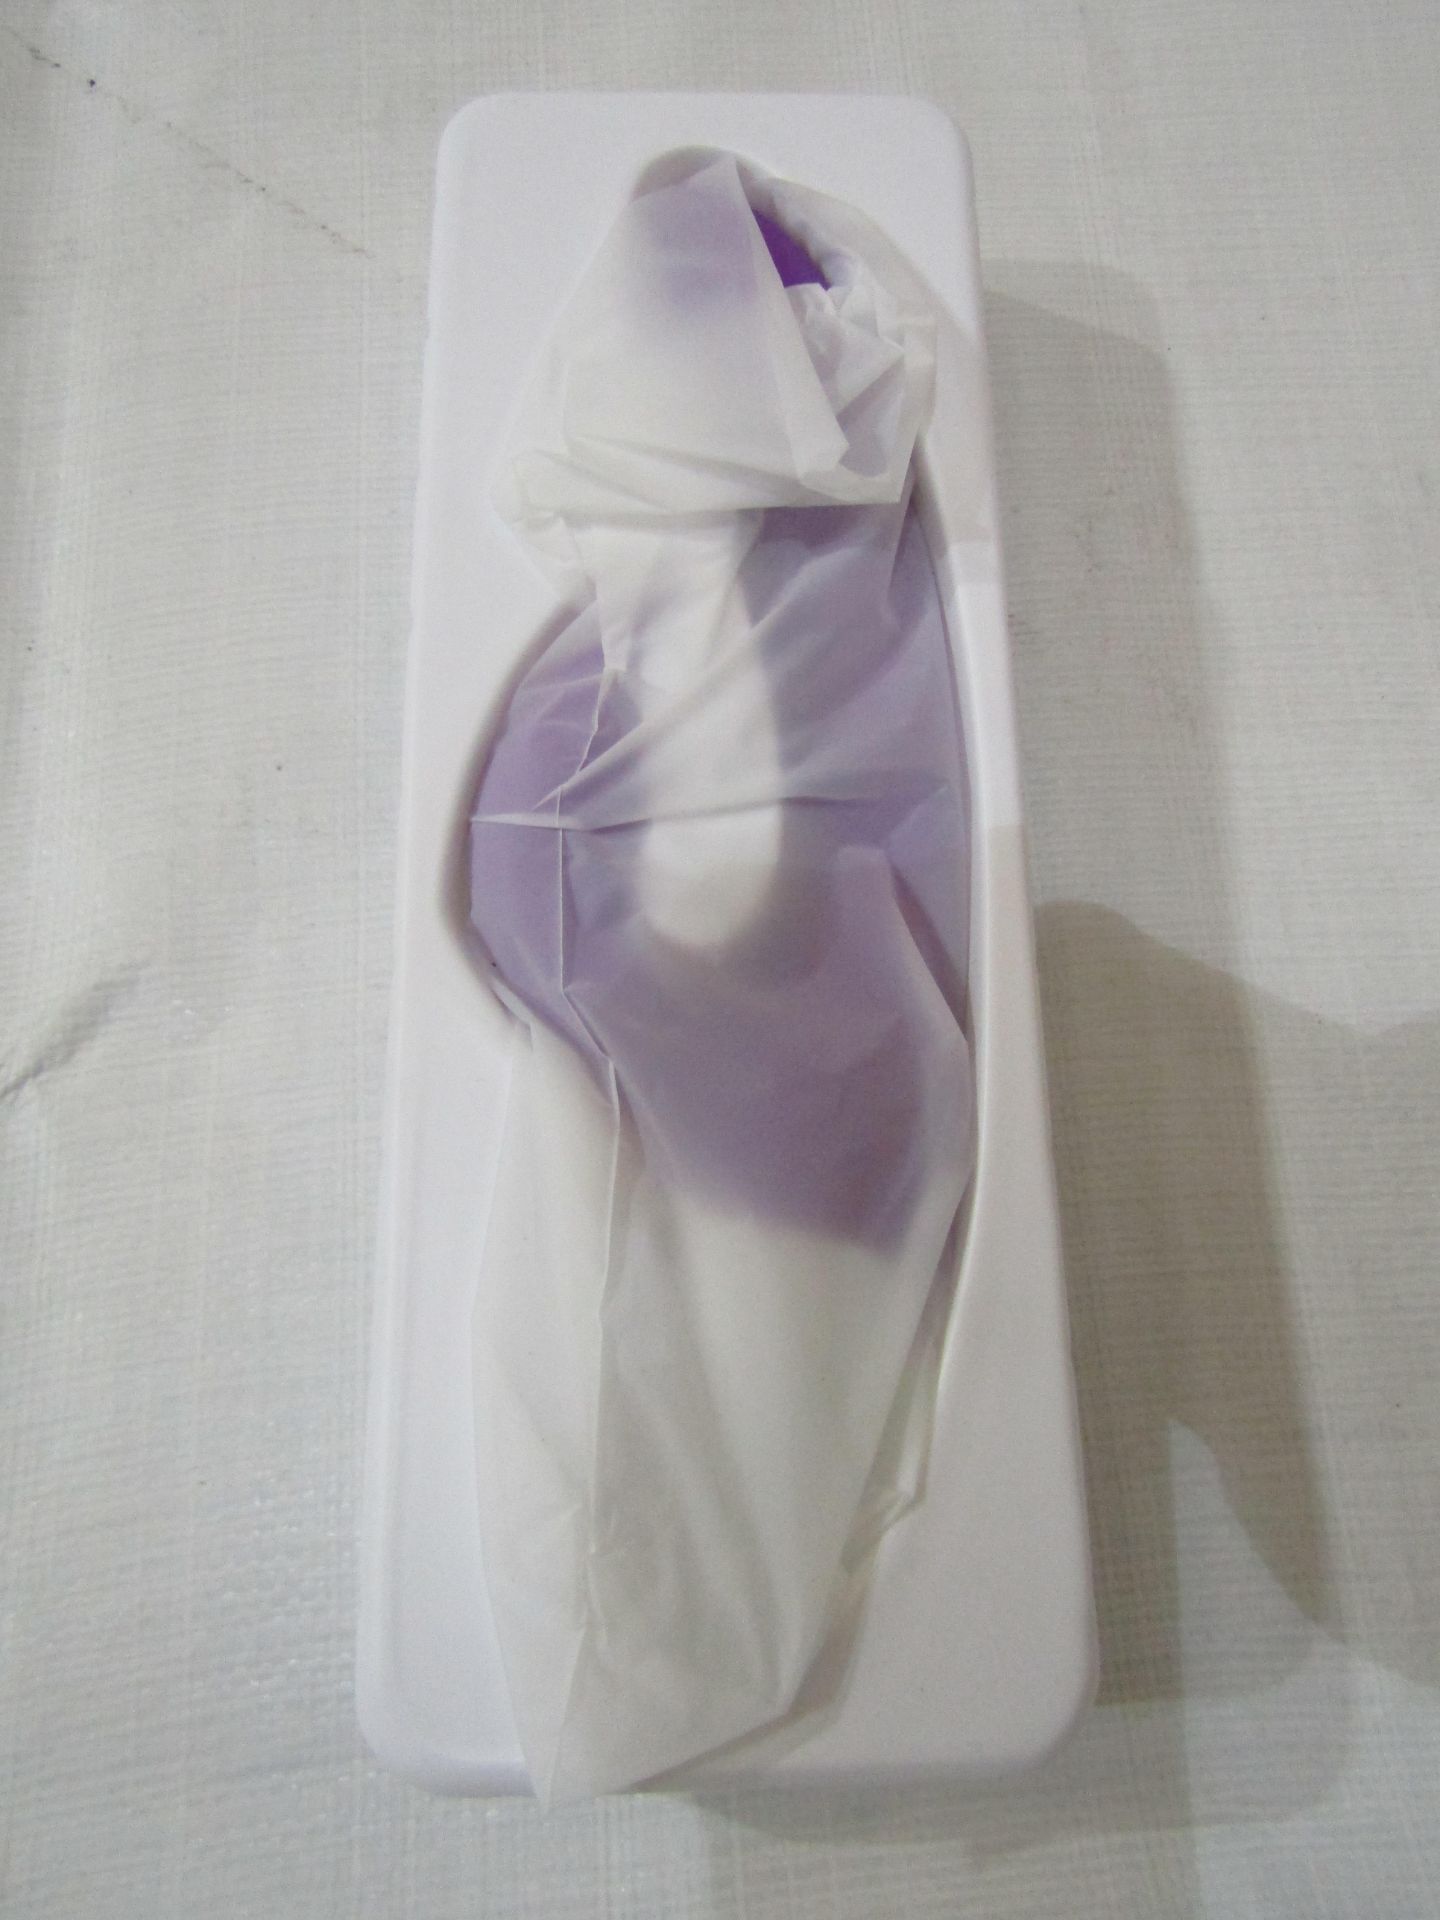 Soft Silicone Dildo With Clit Vibrator - New & Packaged.